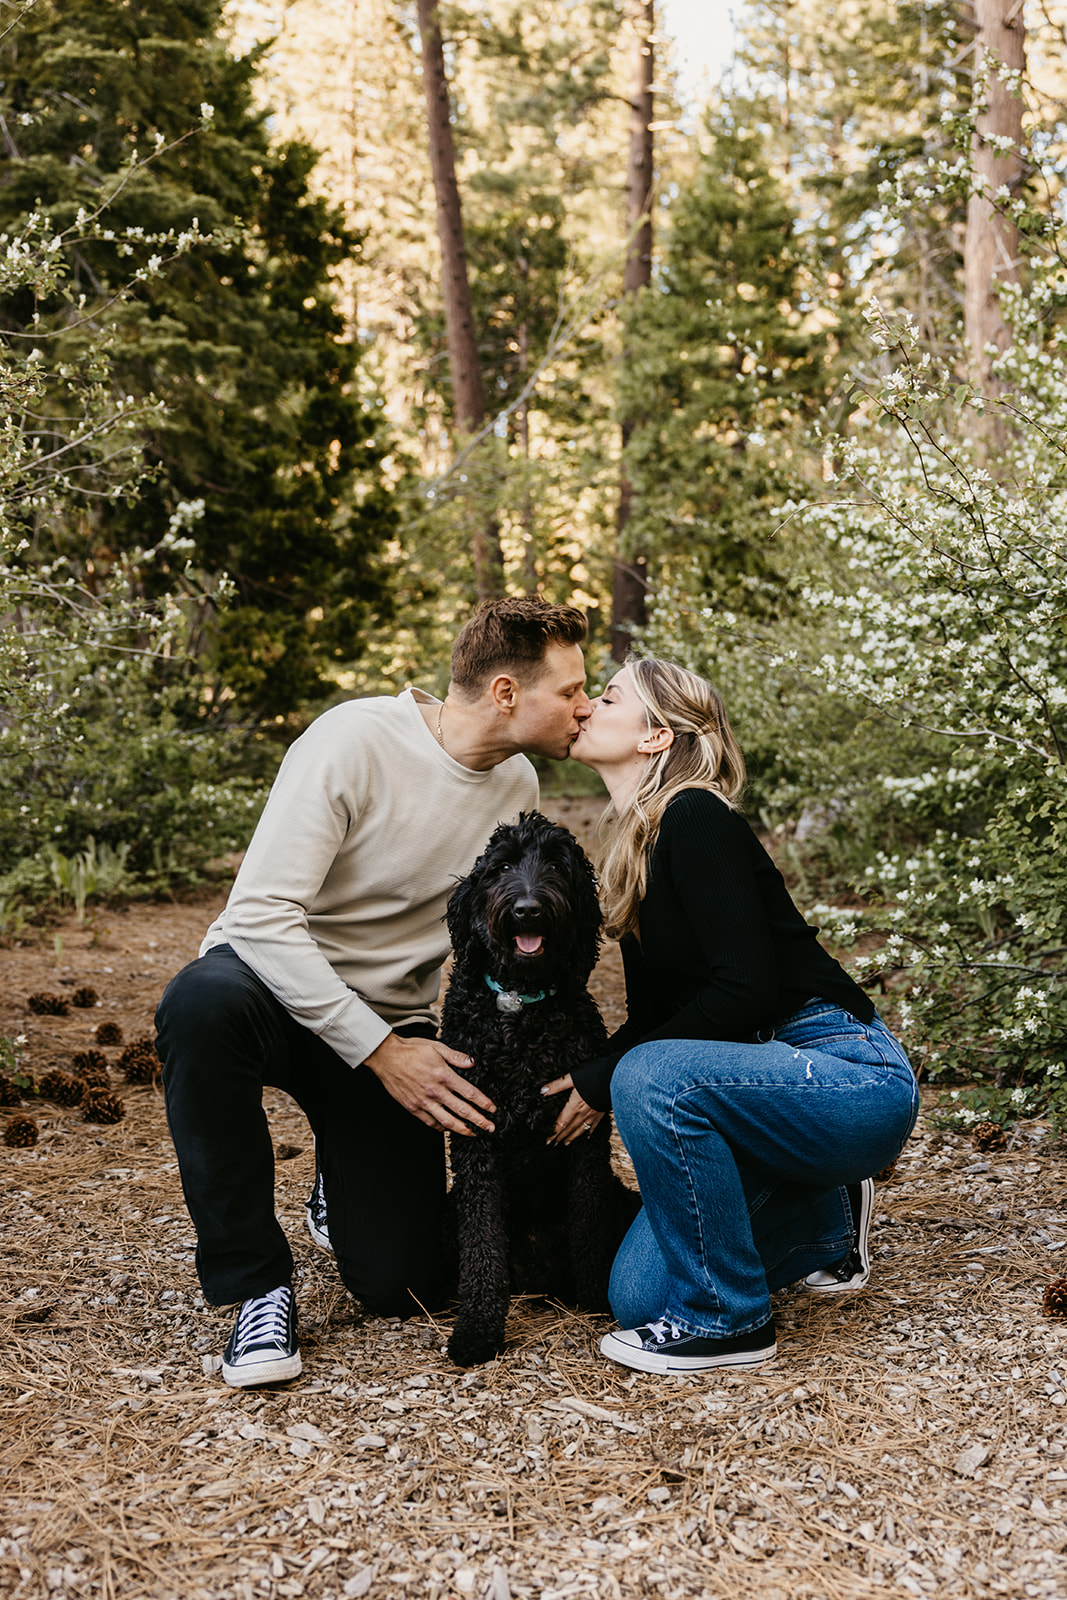 Dani Rawson Photography, a Tahoe-based Engagement Photographer, shares a beautiful summer engagement session in North La